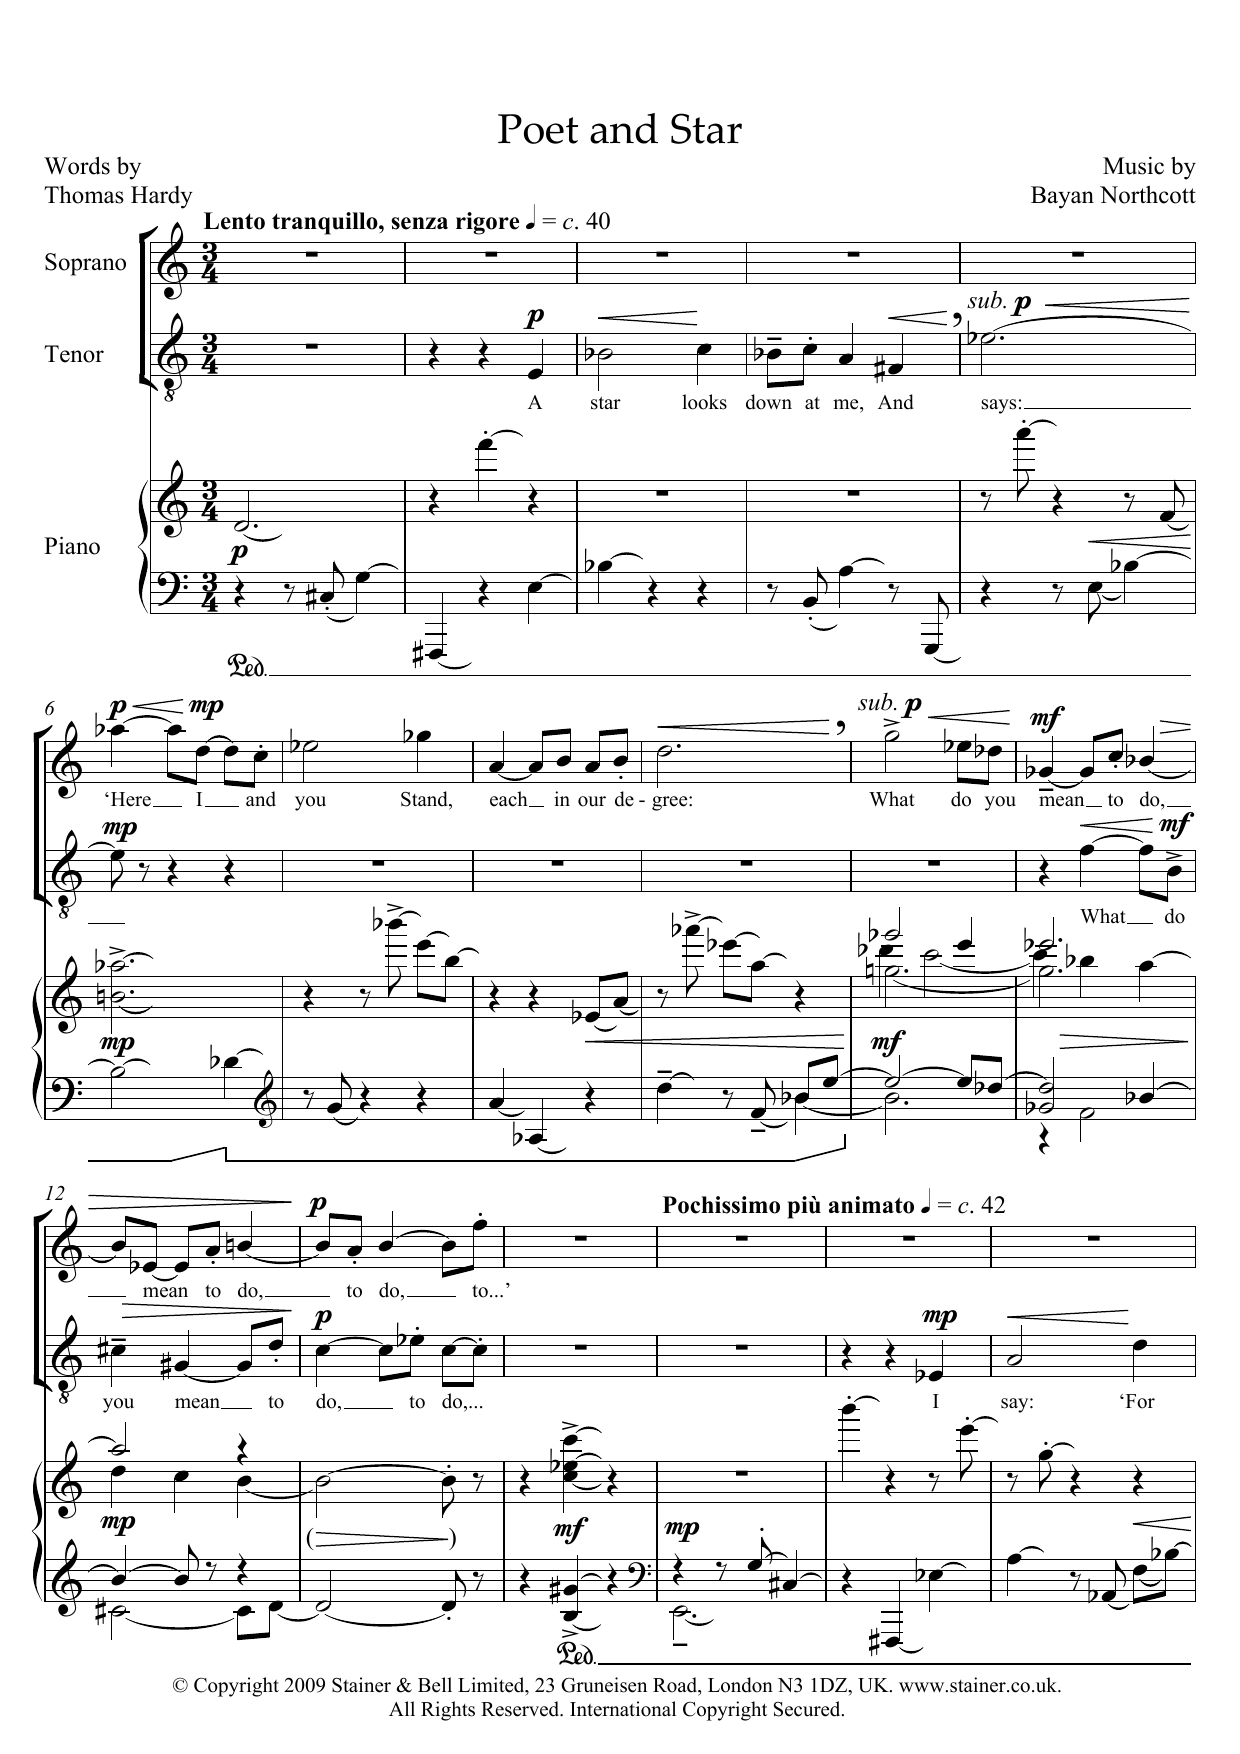 Download Bayan Northcott Poet and Star (for soprano, tenor & pia Sheet Music